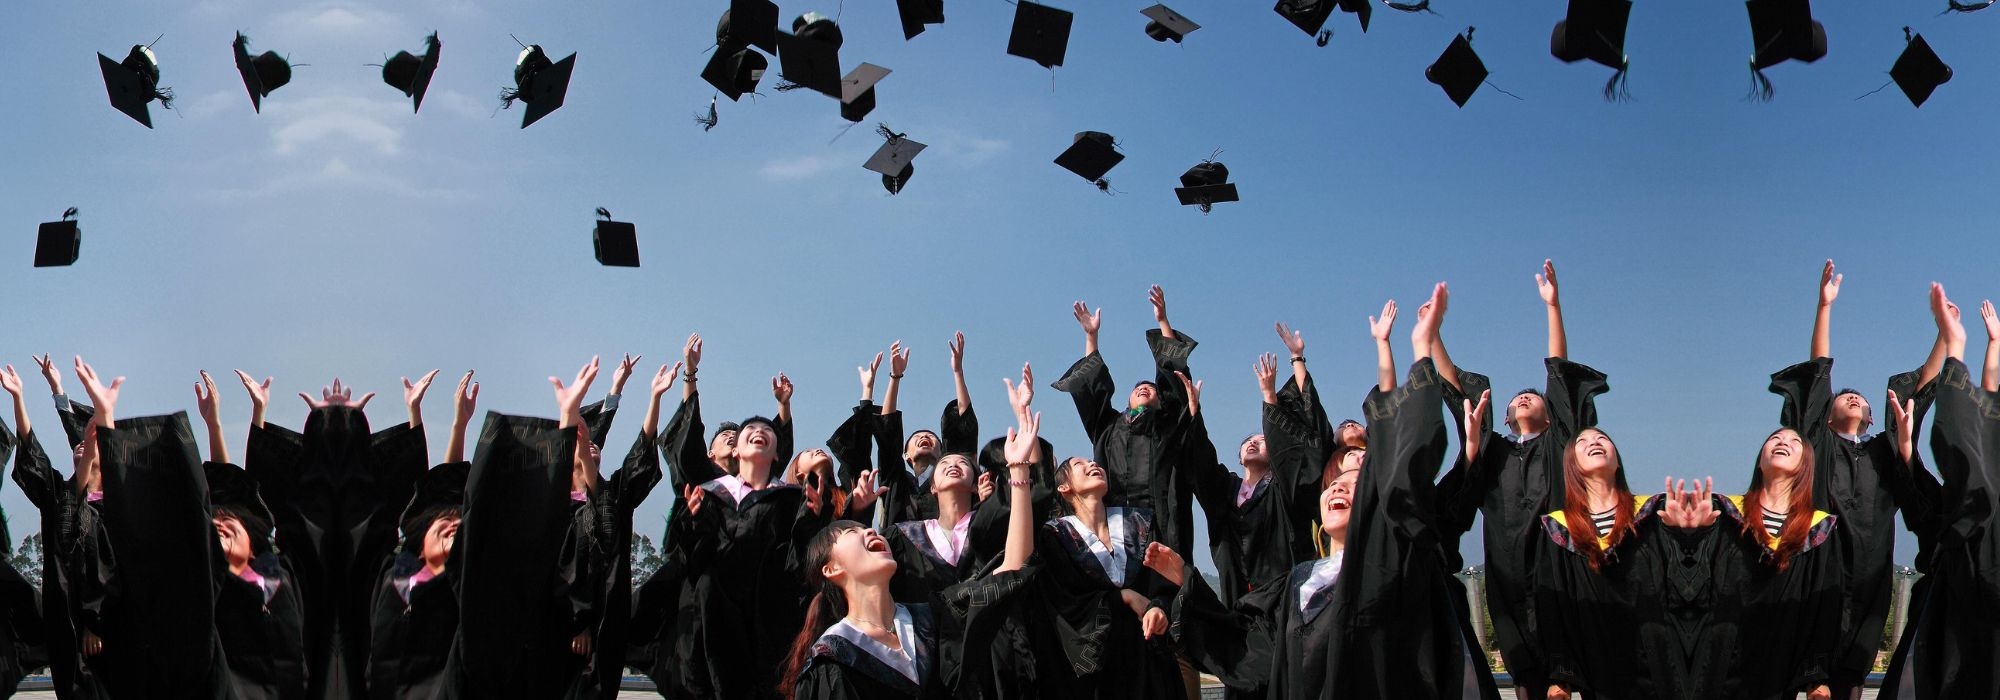 A group of young people in graduating gowns throwing their caps in the air.